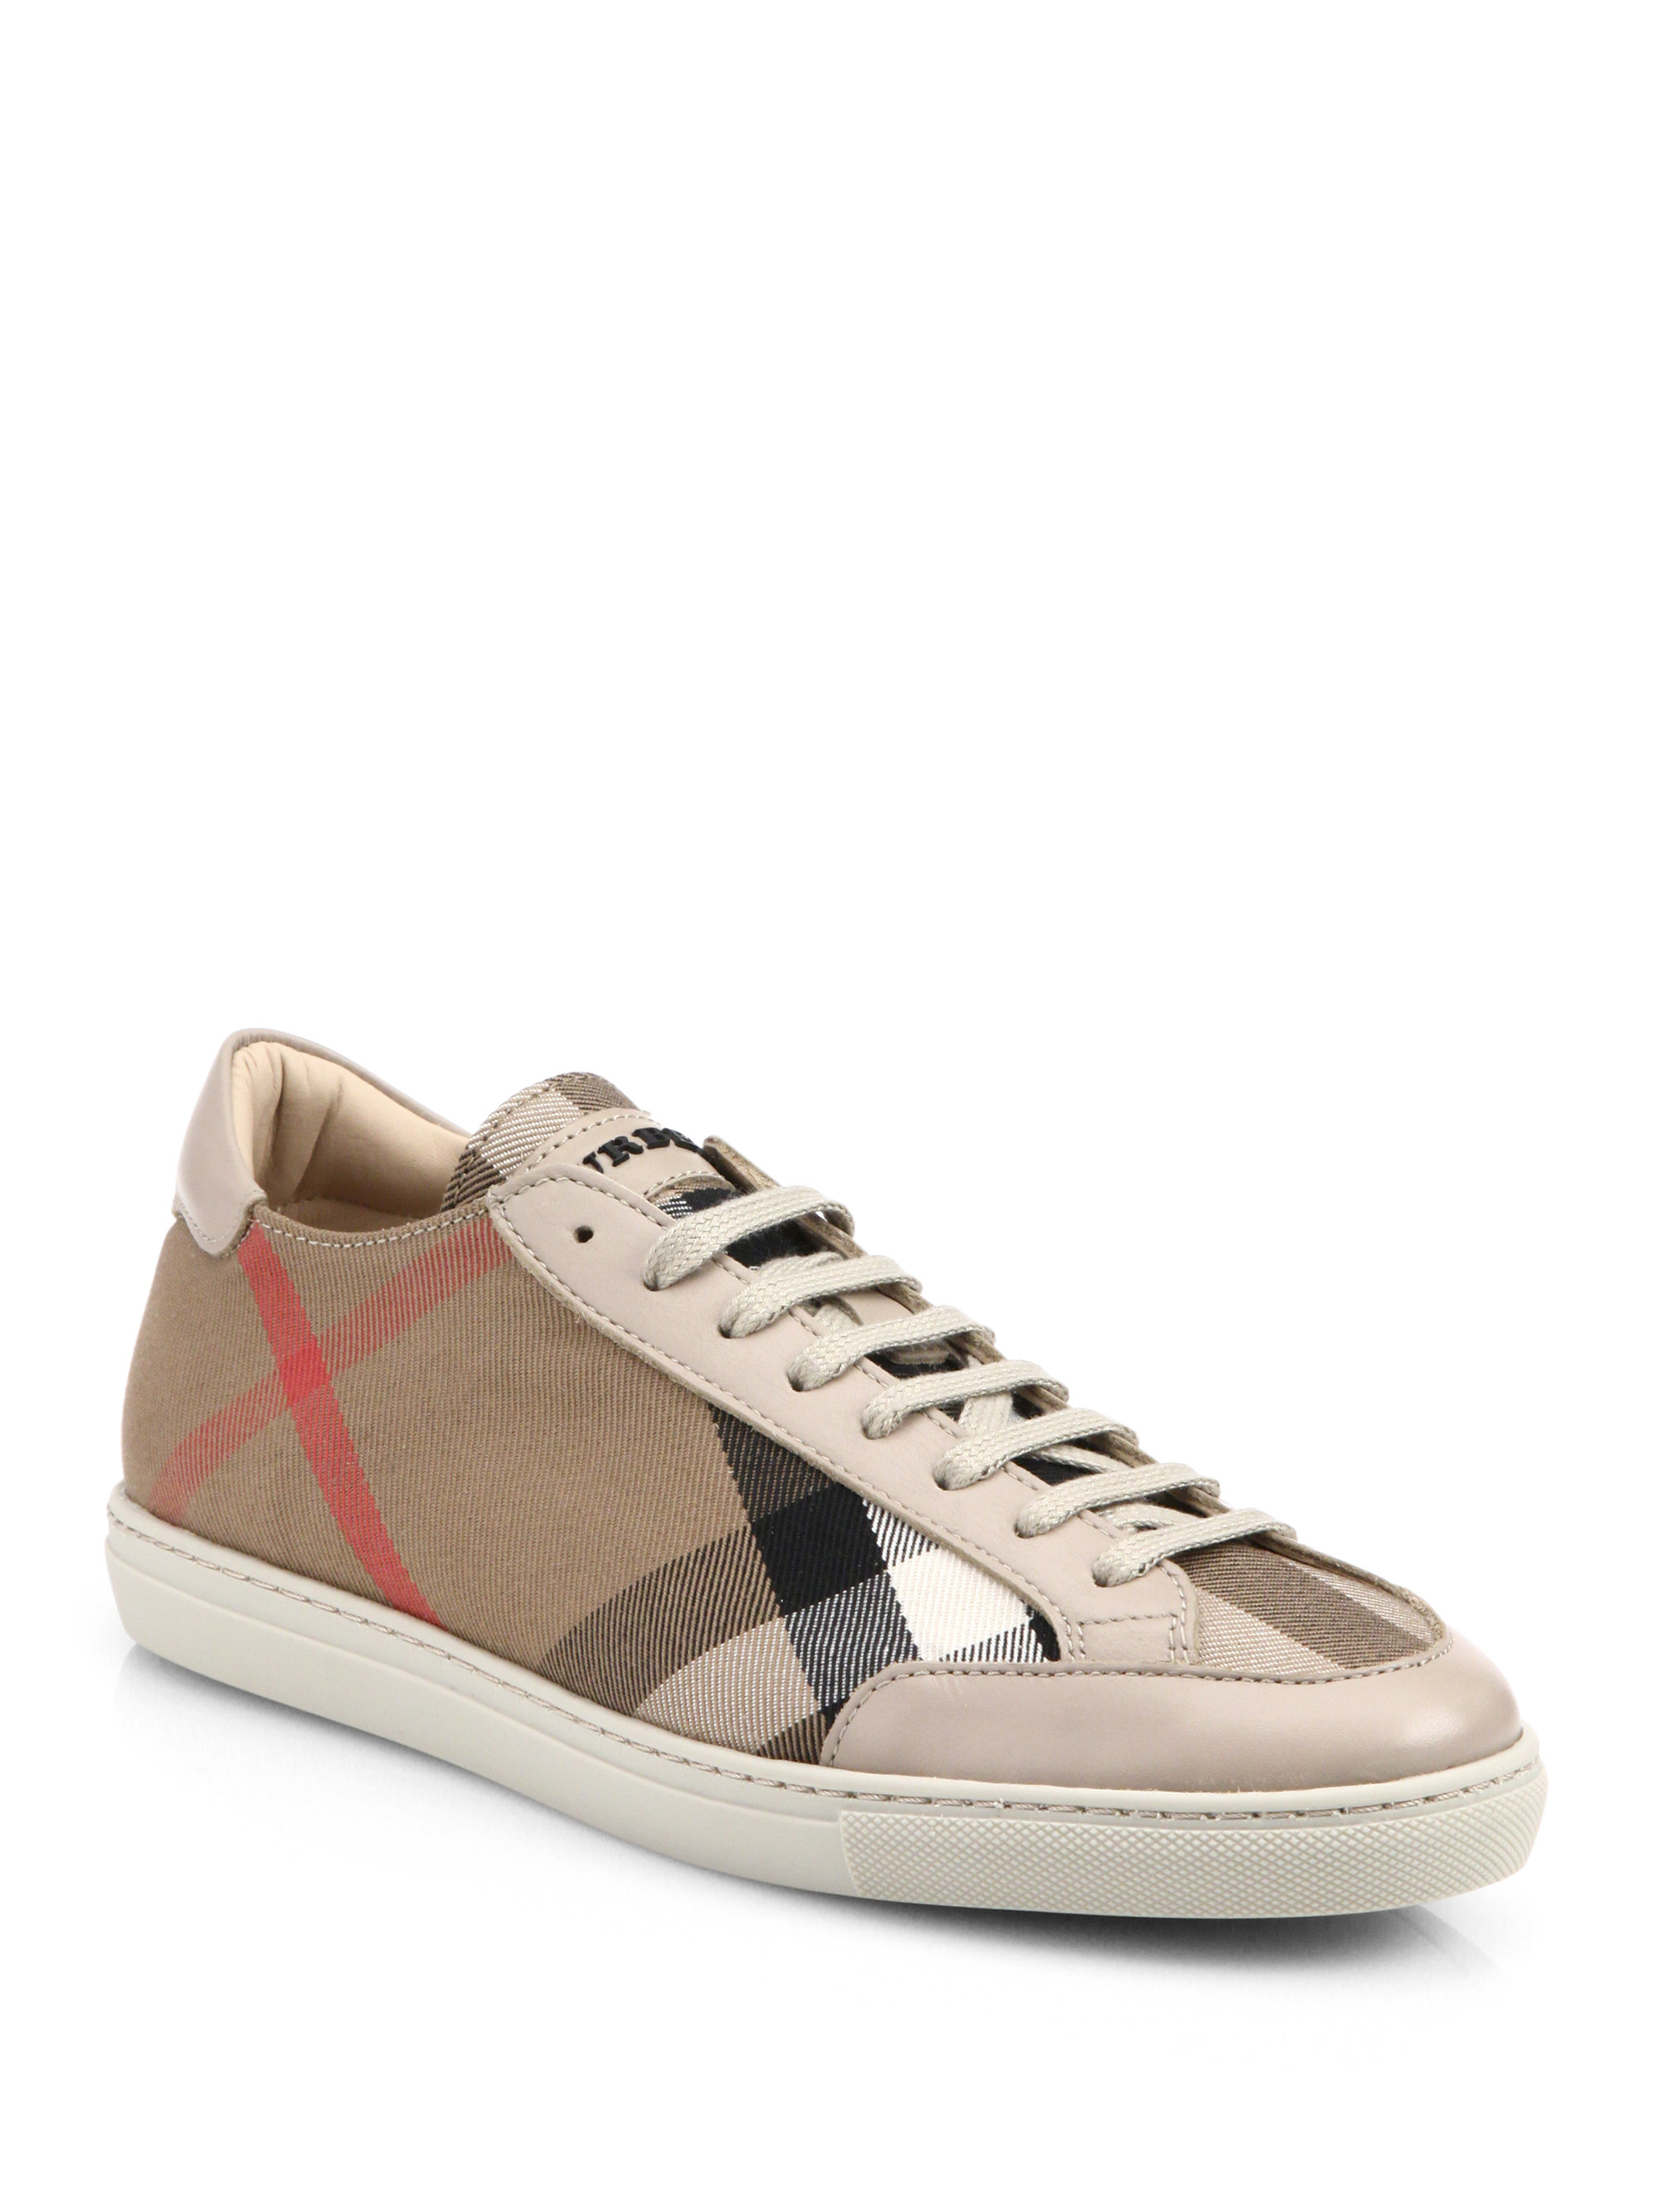 Burberry Shoes Saks Fifth Avenue | The 